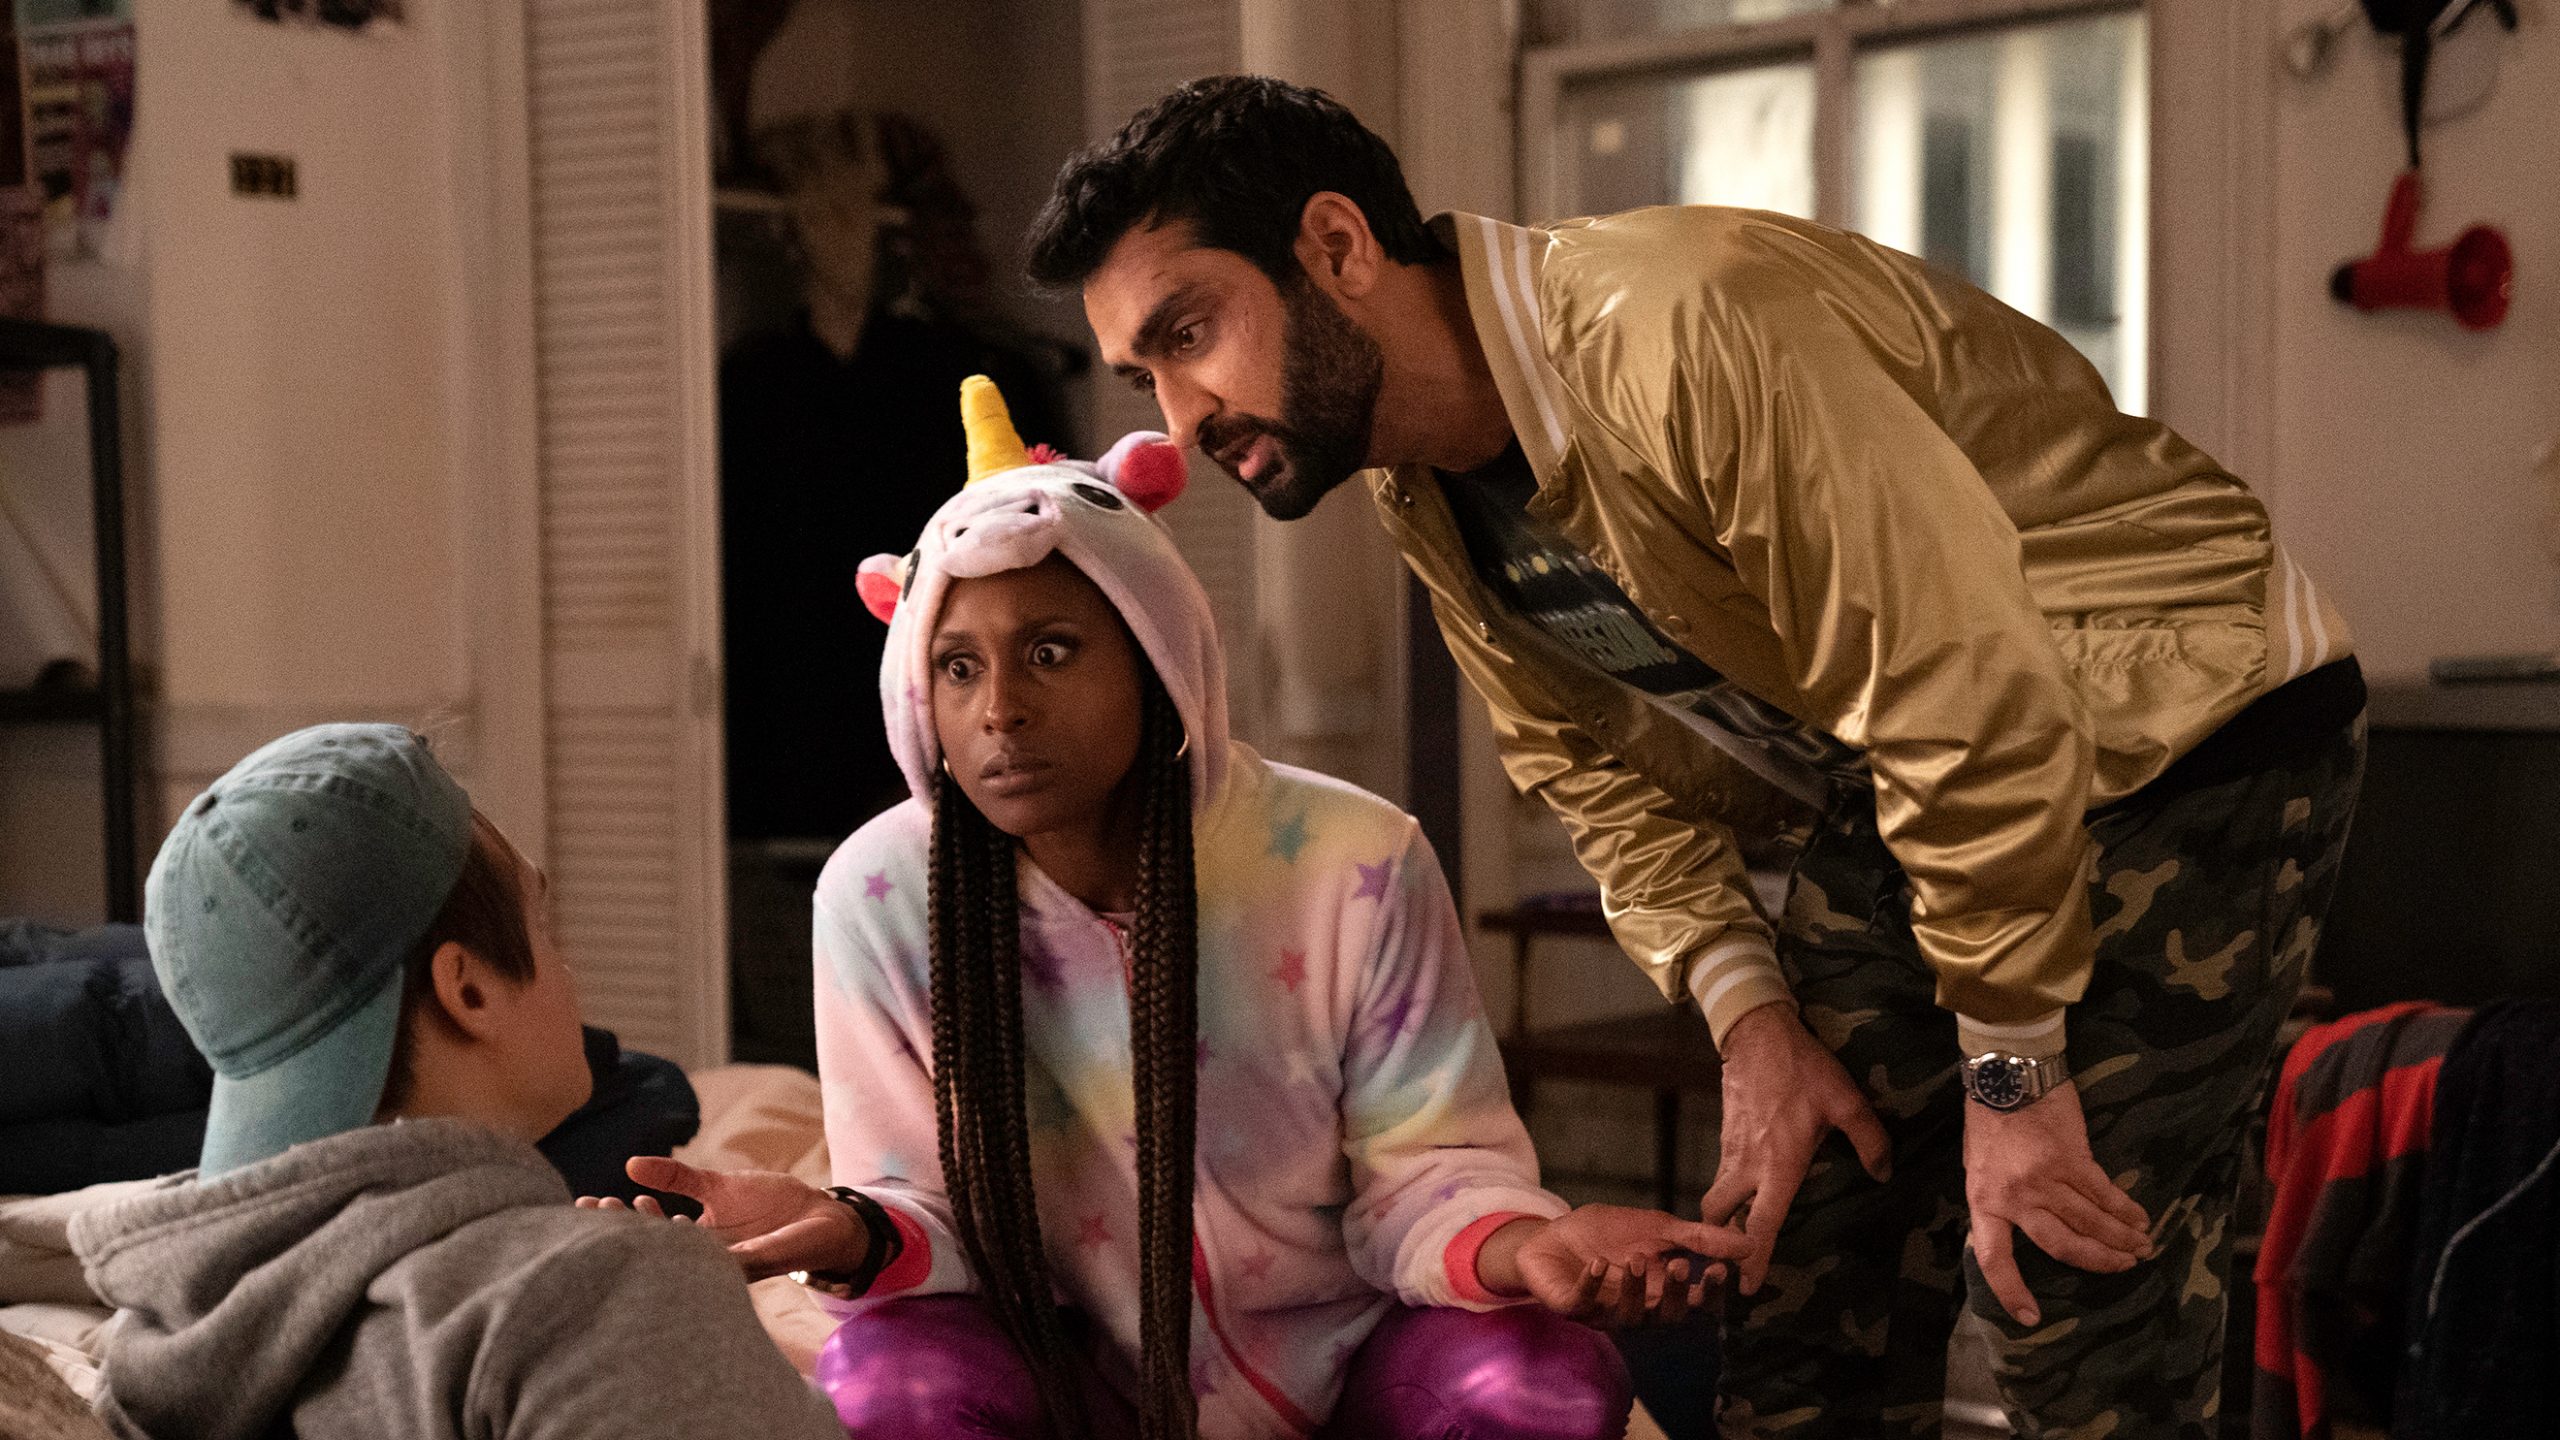 New Comedies On Netflix March 2021 / New On Netflix For March 2021: Movies And TV Shows - Daily ... / © provided by bgr netflix march 2021 netflix has shared its list of arrivals and departures for the month of march 2021.